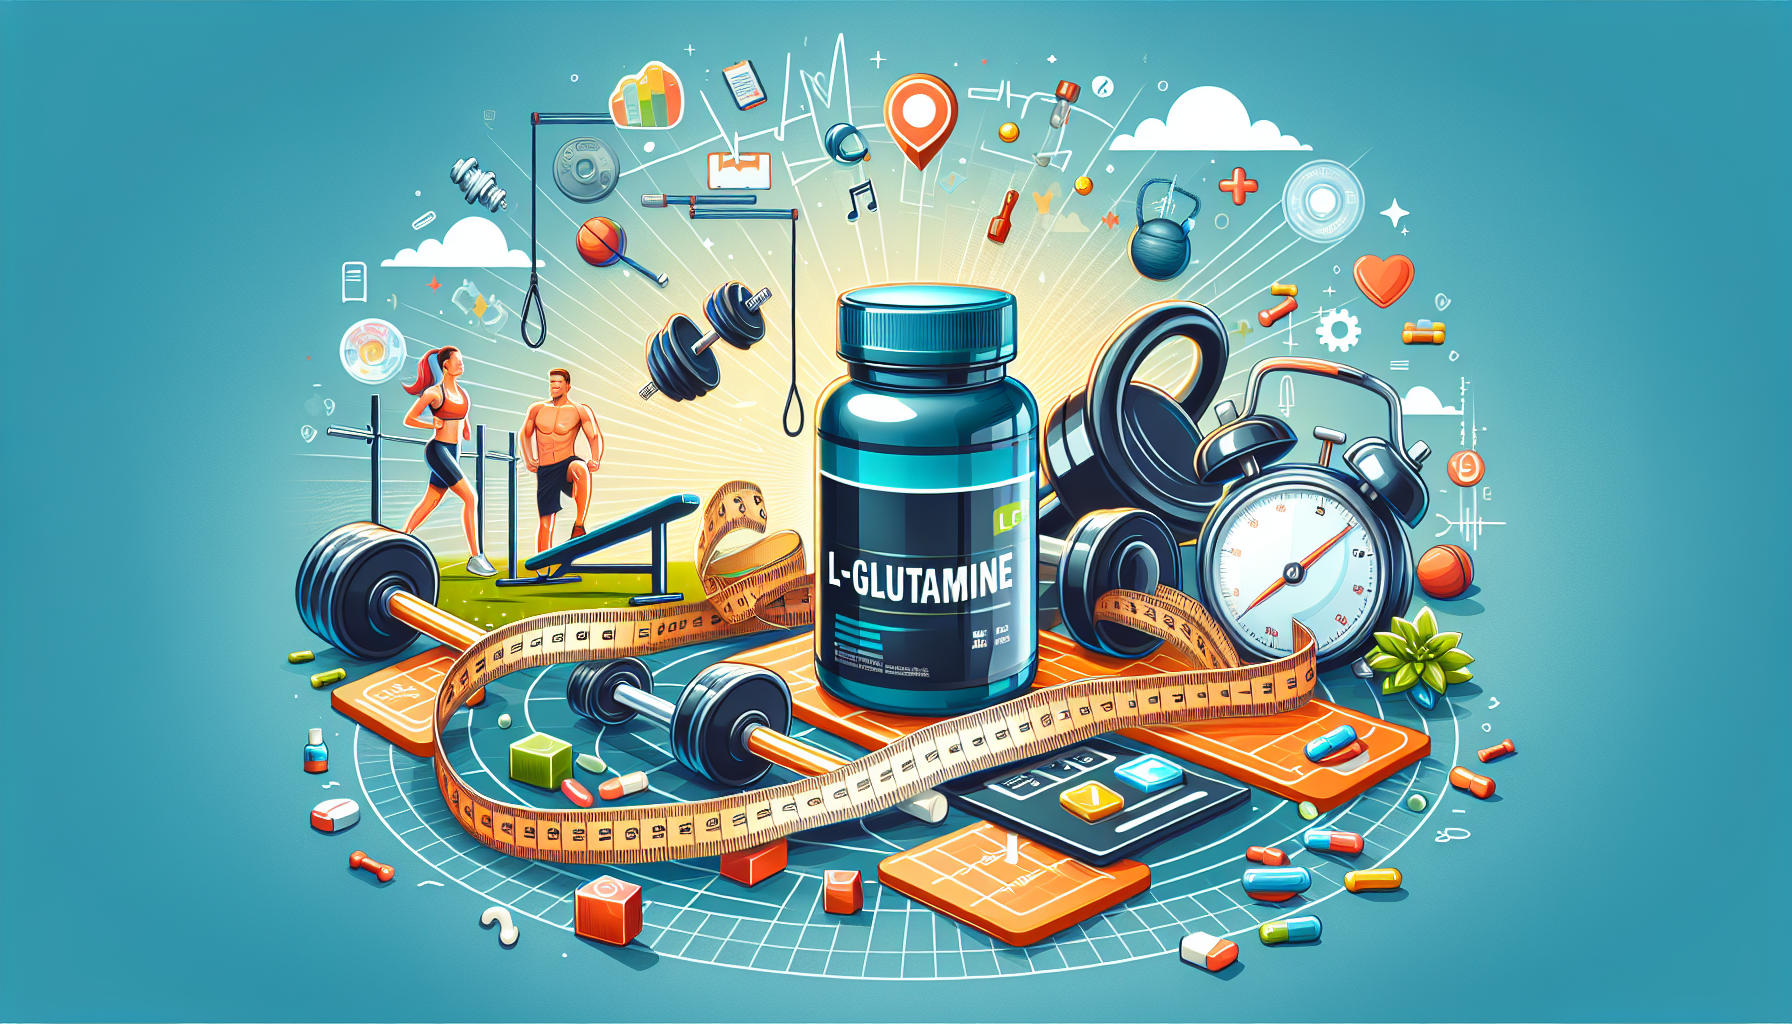 Achieve your fitness goals with l-glutamine supplements